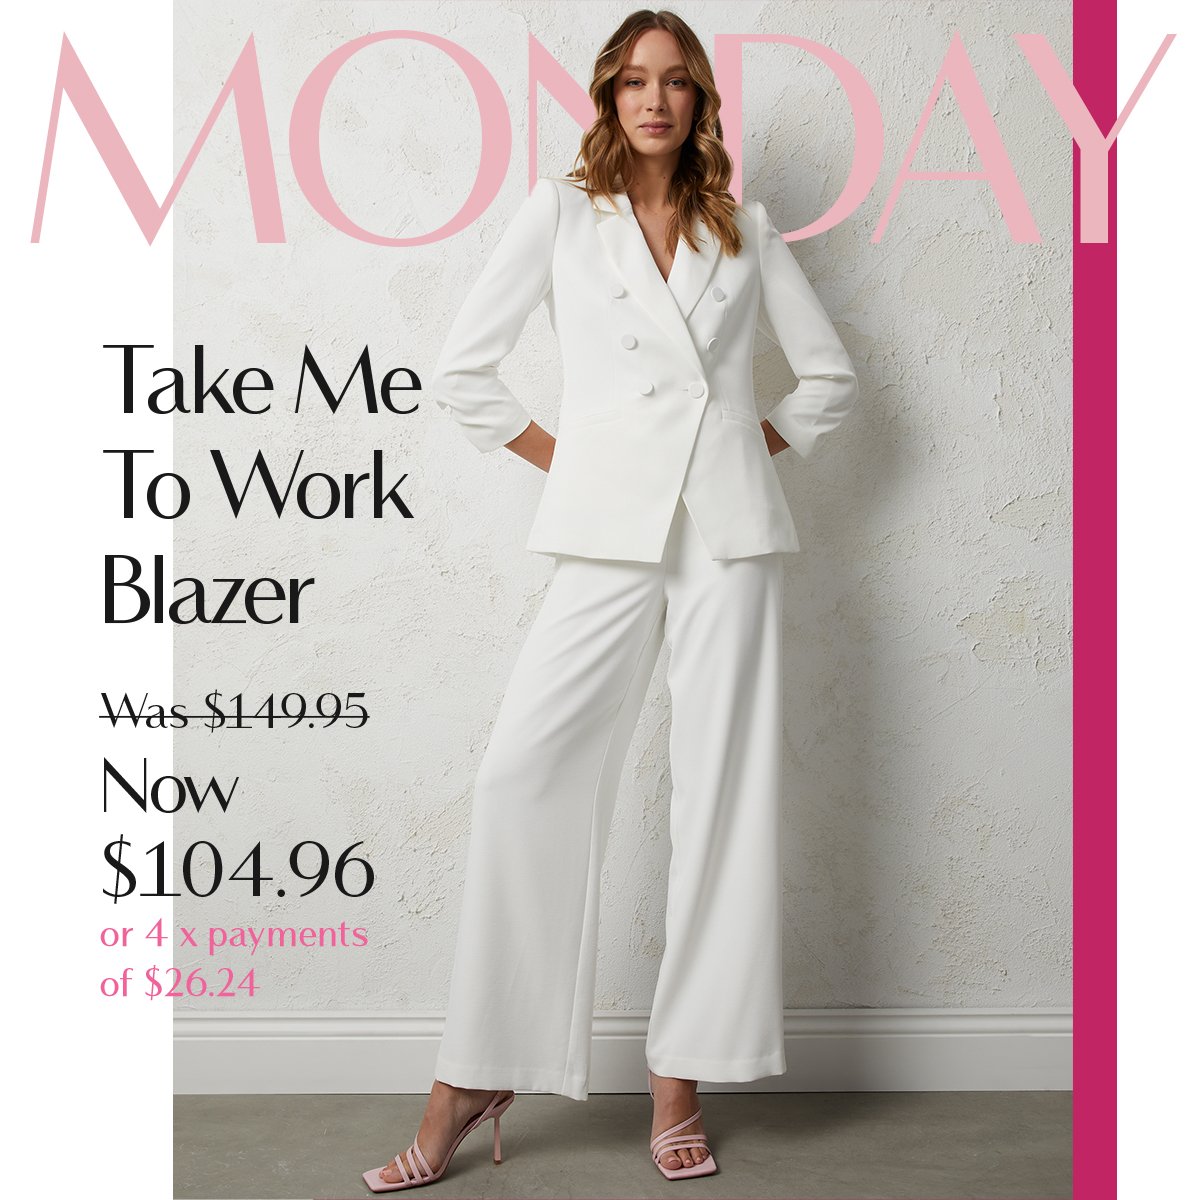 MONDAY | Take Me To Work Blazer Was $149.95 Now $104.96  or 4 x payments of $26.24